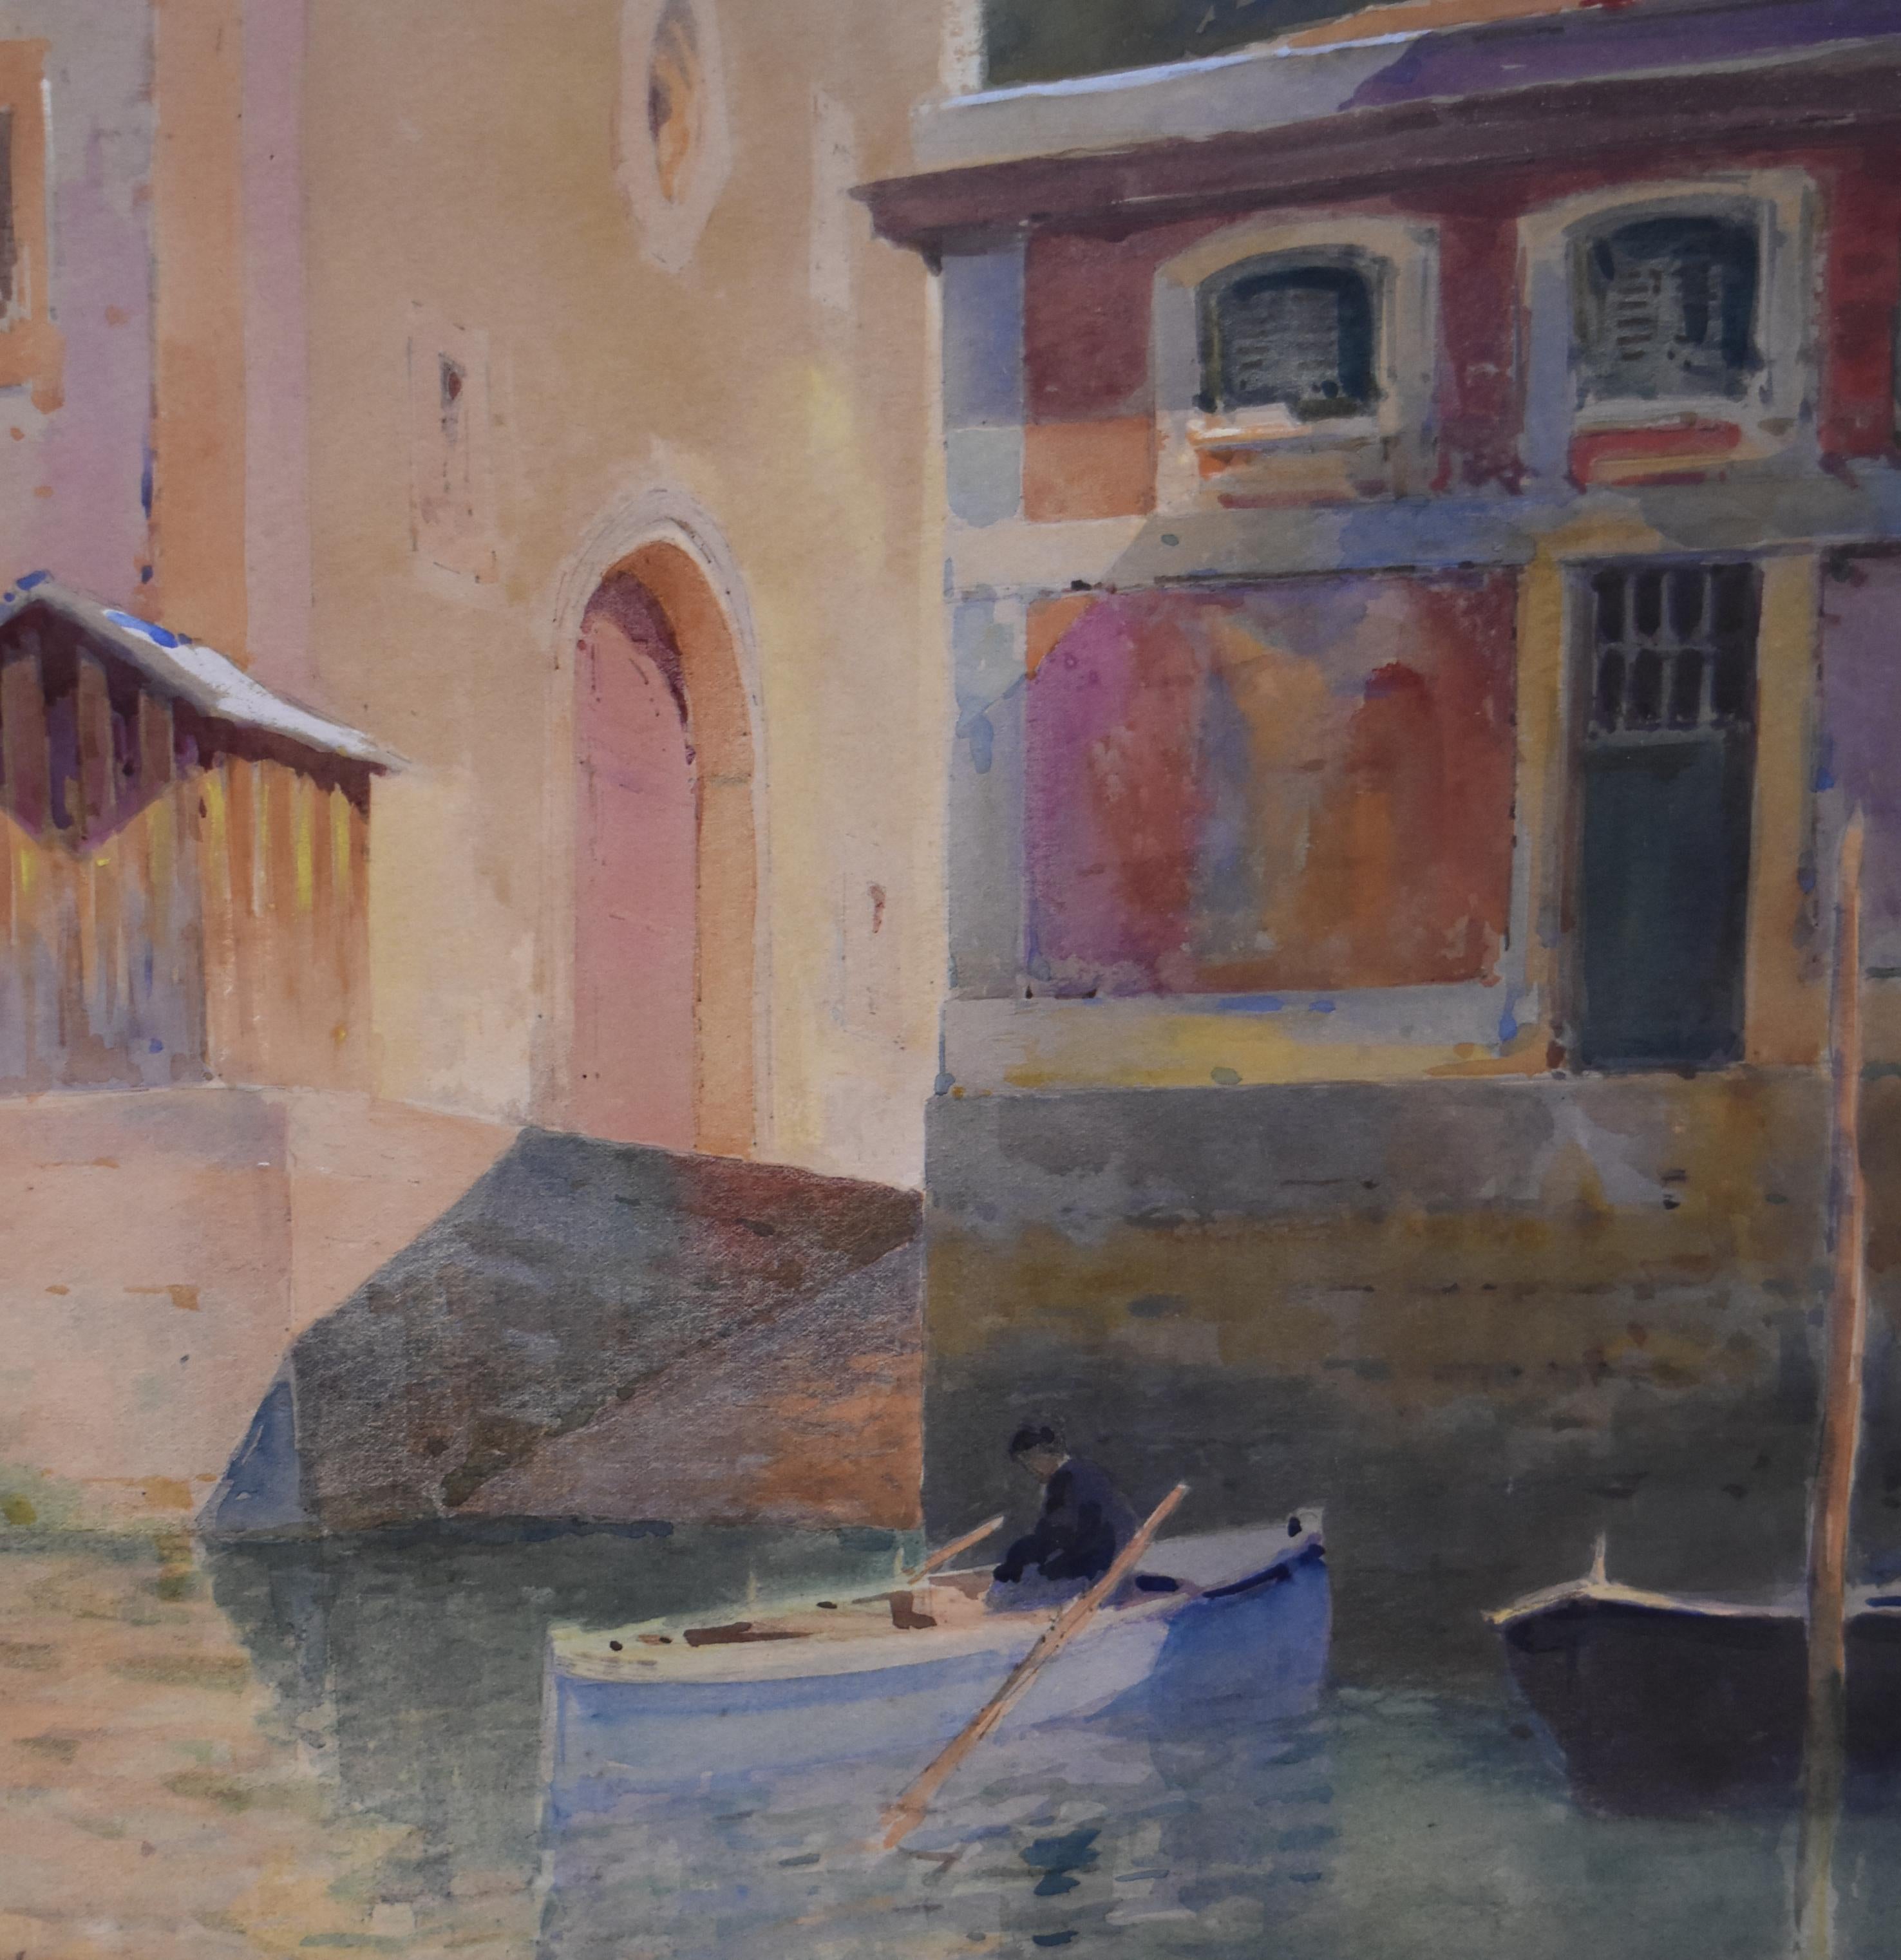 Paul Emile Lecomte (1877-1950)
A Canal in Venice
Signed lower right
Watercolor on paper
45.5 x 33.5 cm 
Framed 64 x 54 cm

Paul Emile Lecomte (1877– 1950). Painter of watercolors and oil paintings, etcher, and engraver. He was the pupil of Fernand